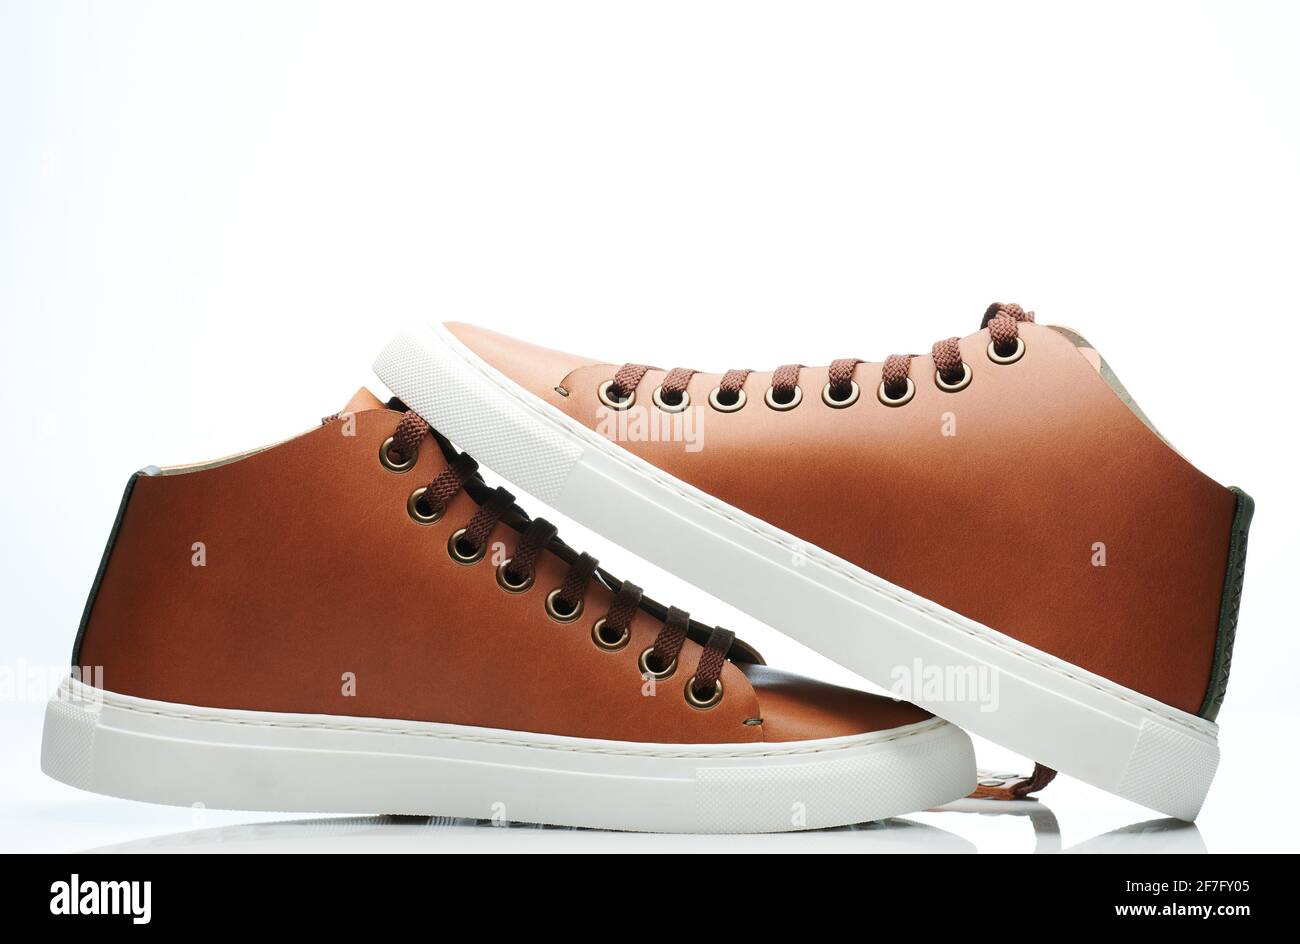 Pair of new brown sneaker shoes isolated on white studio background Stock Photo